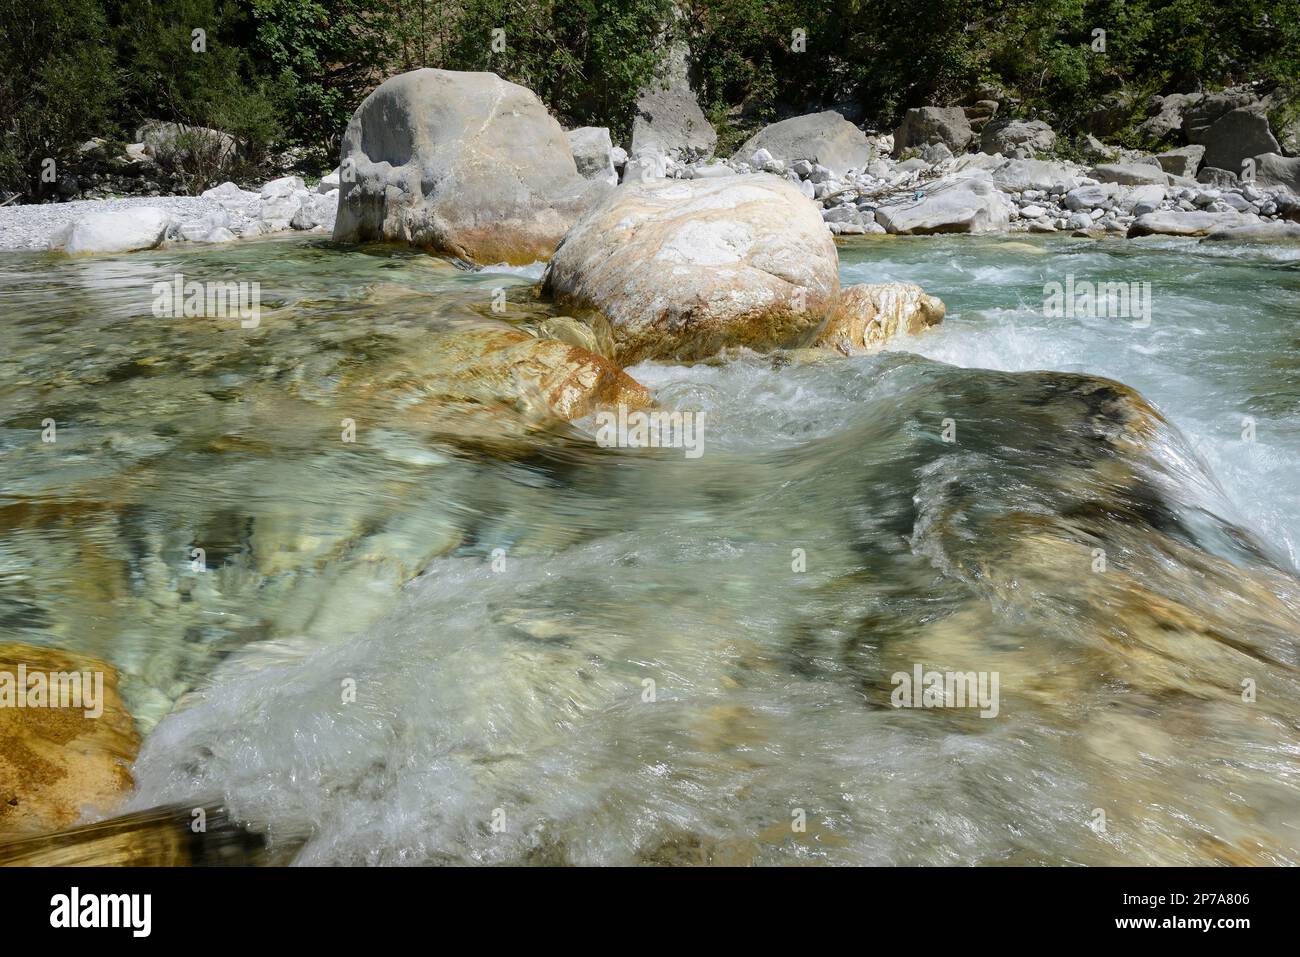 Crystal clear, clean water in the rocky riverbed of the Valbona, Valbona Valley, Albania Stock Photo